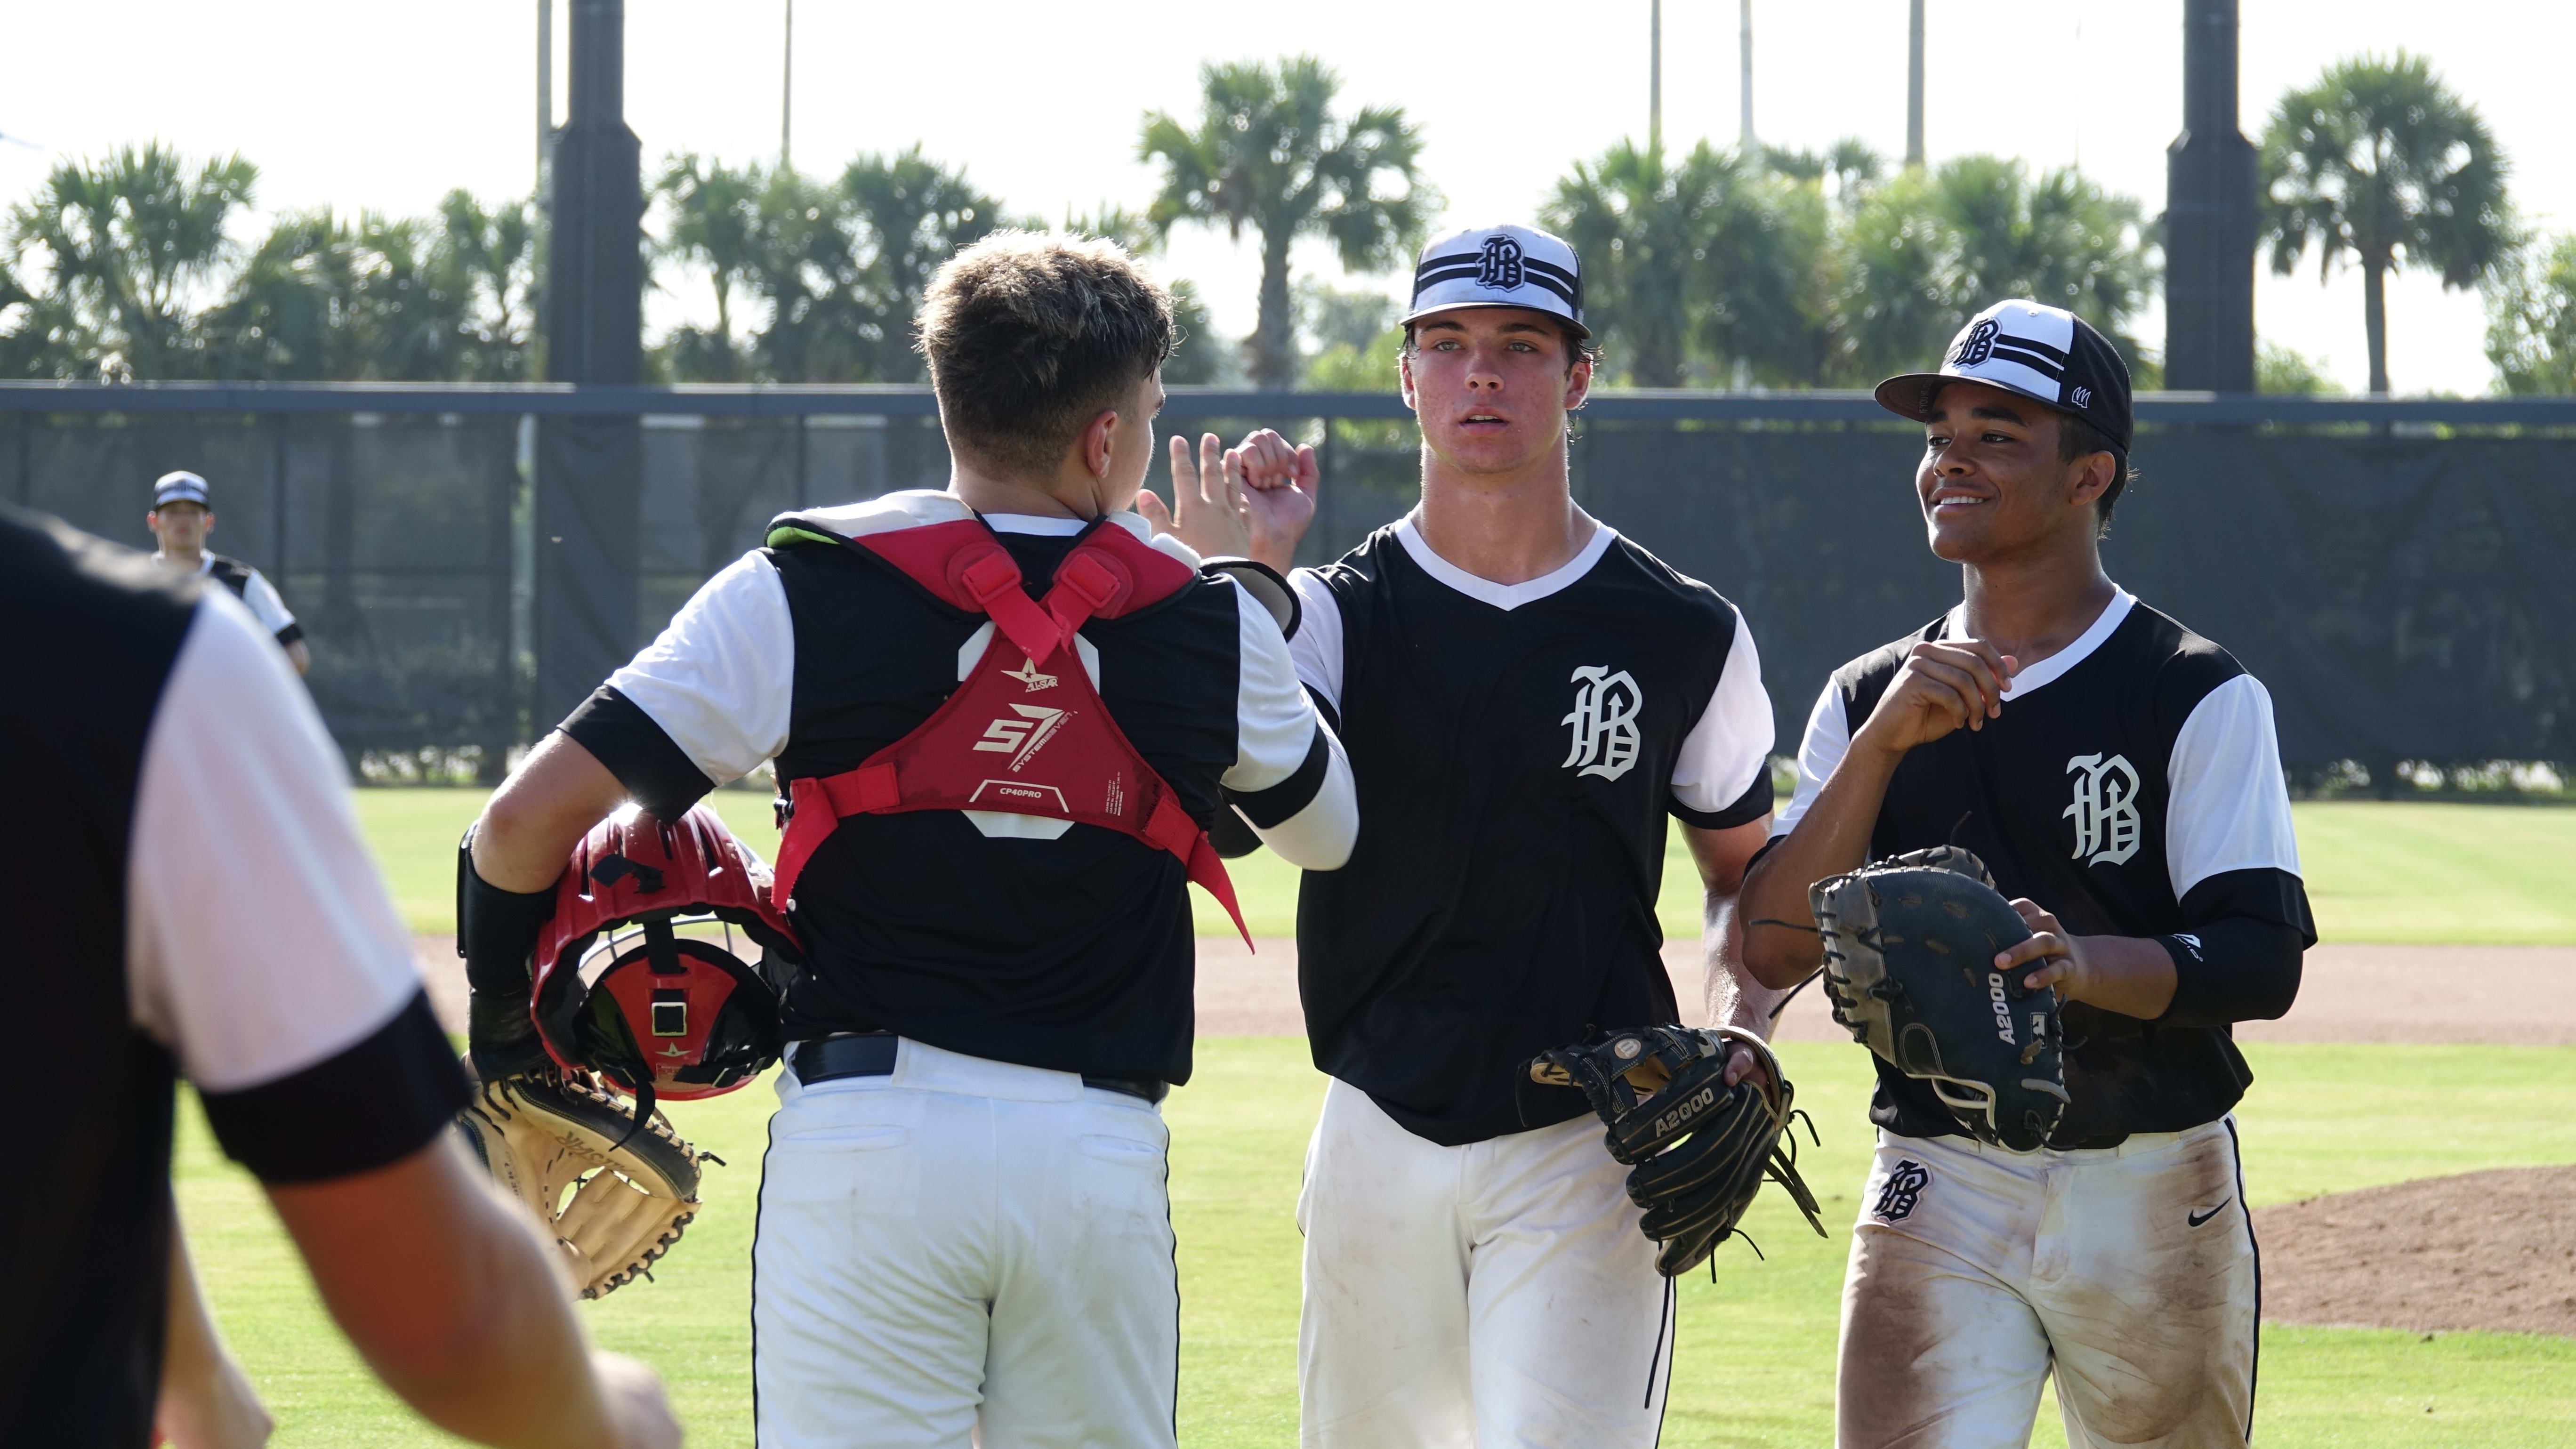 Padres Scout Team DOMINATES in West Palm